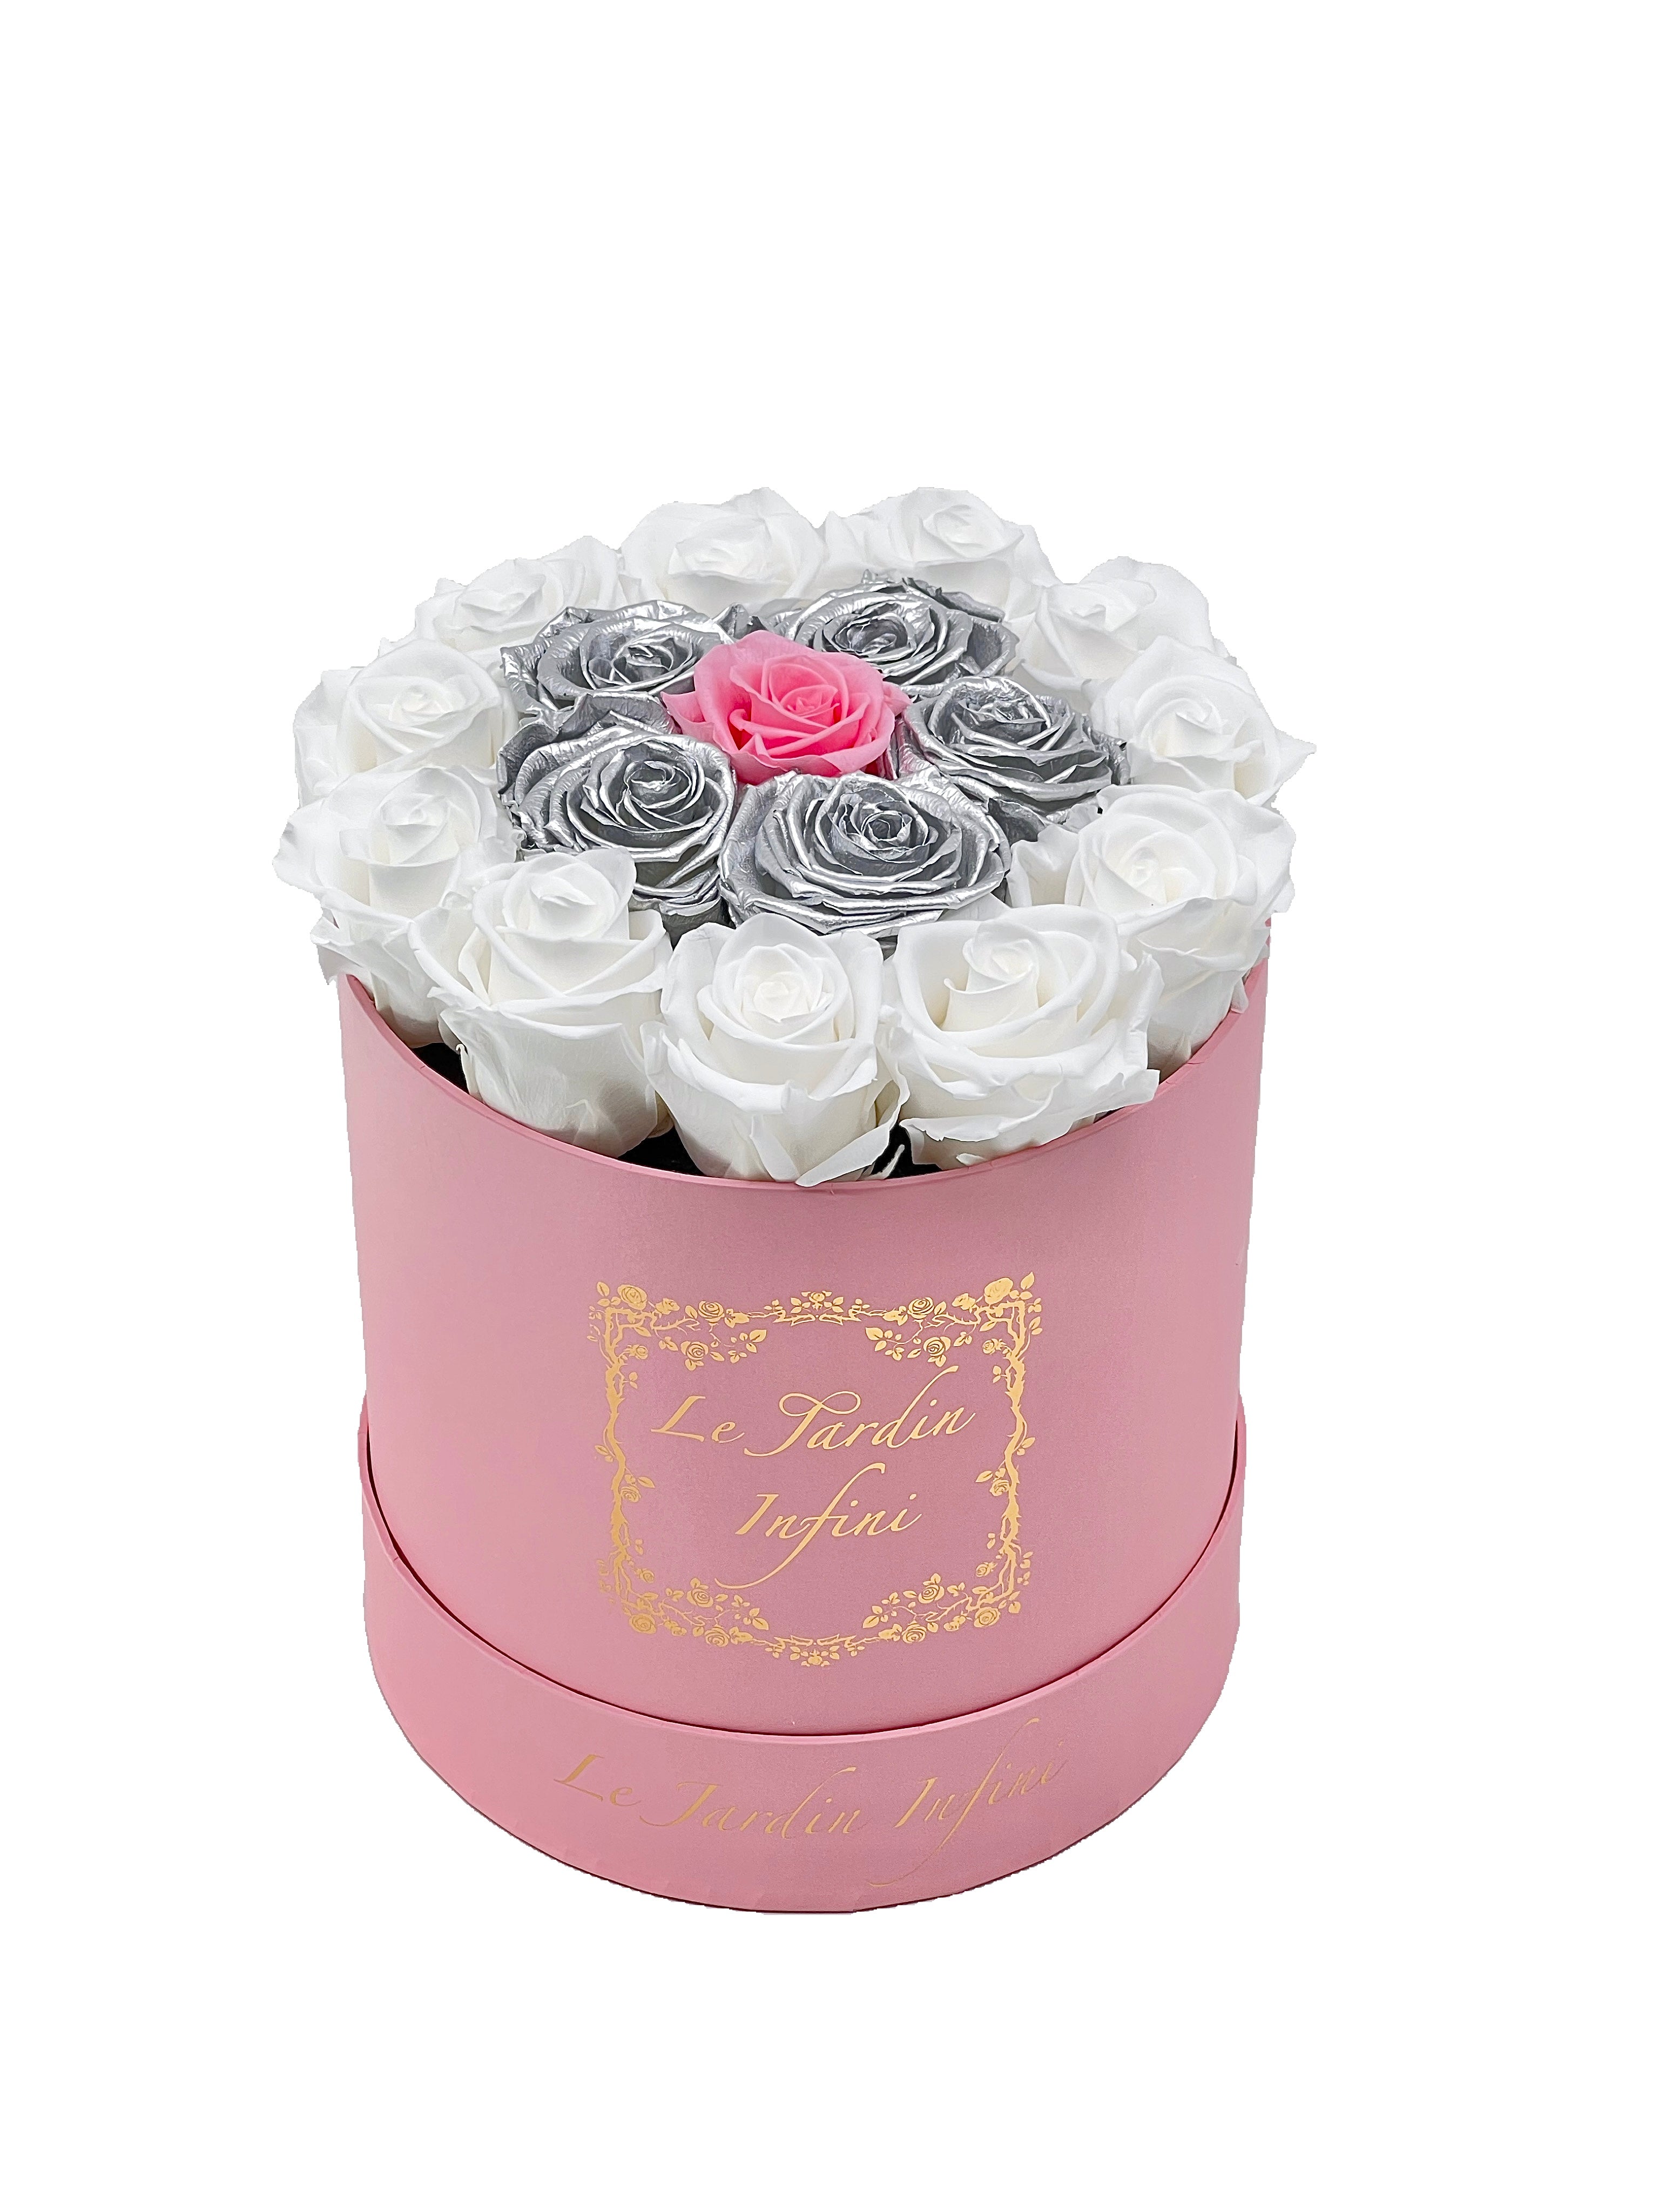 White Preserved Roses with Silver, & 1 Pink Rose - Medium Round Pink Box